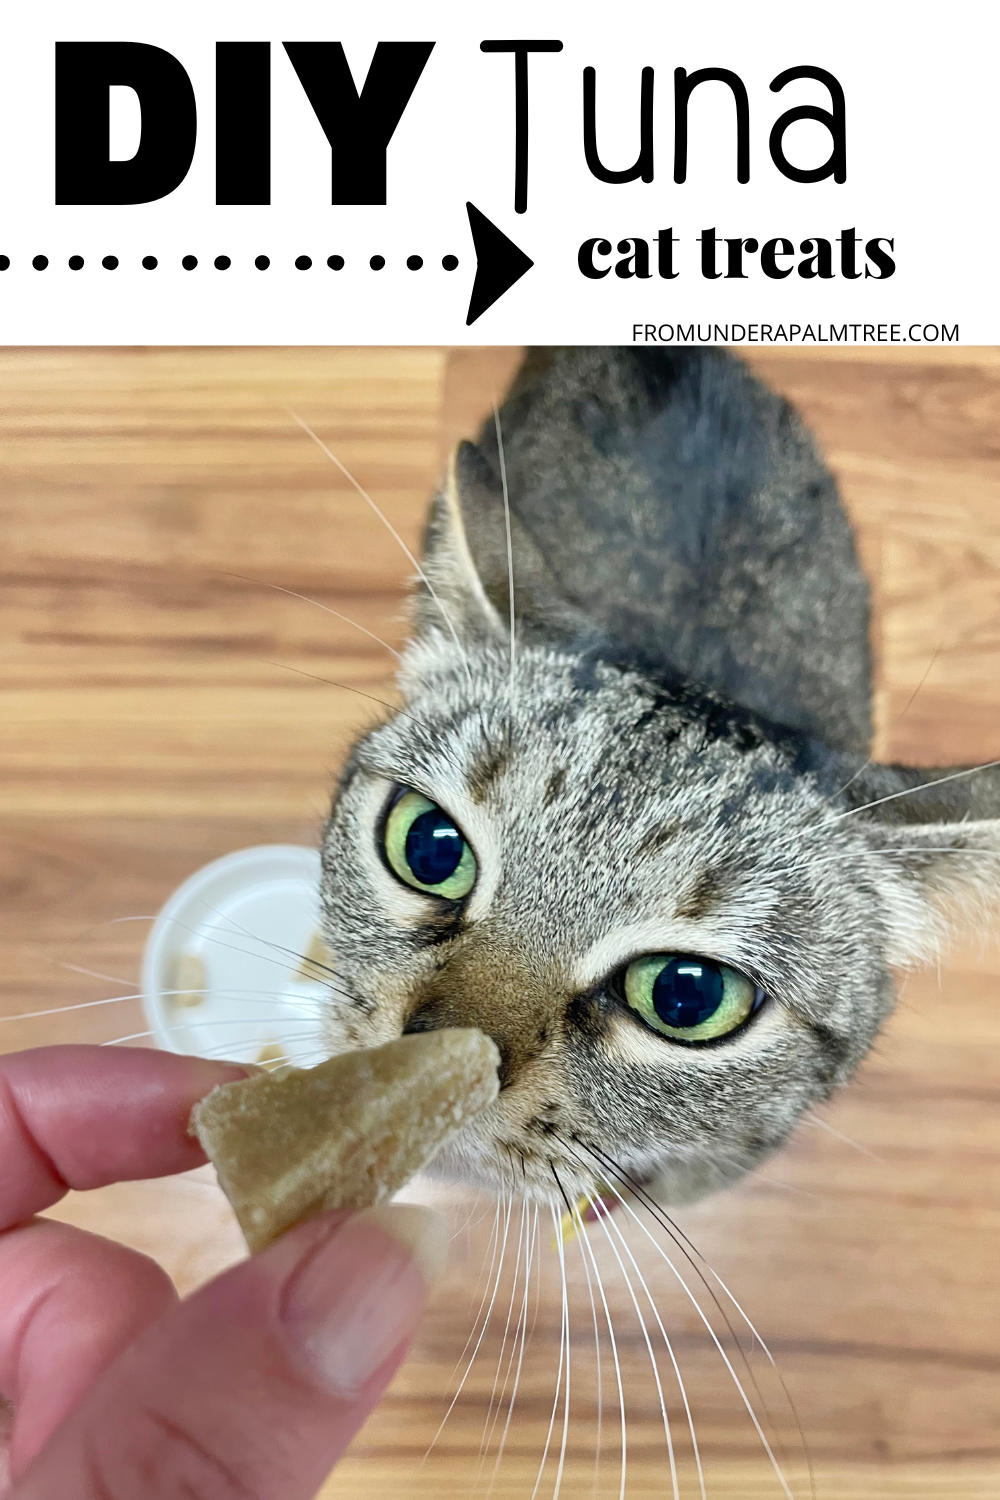 DIY Tuna Cat Treats | Tuna Cat Treats | DIY cat treats | cat treat recipe | tuna treats | DIY treats | cat mom | catdad | healthy cat treats | recipe to make cat treats | at home cat treat recipe | how to make my own cat treats | recipe to make cat treats | homemade cat biscuits |